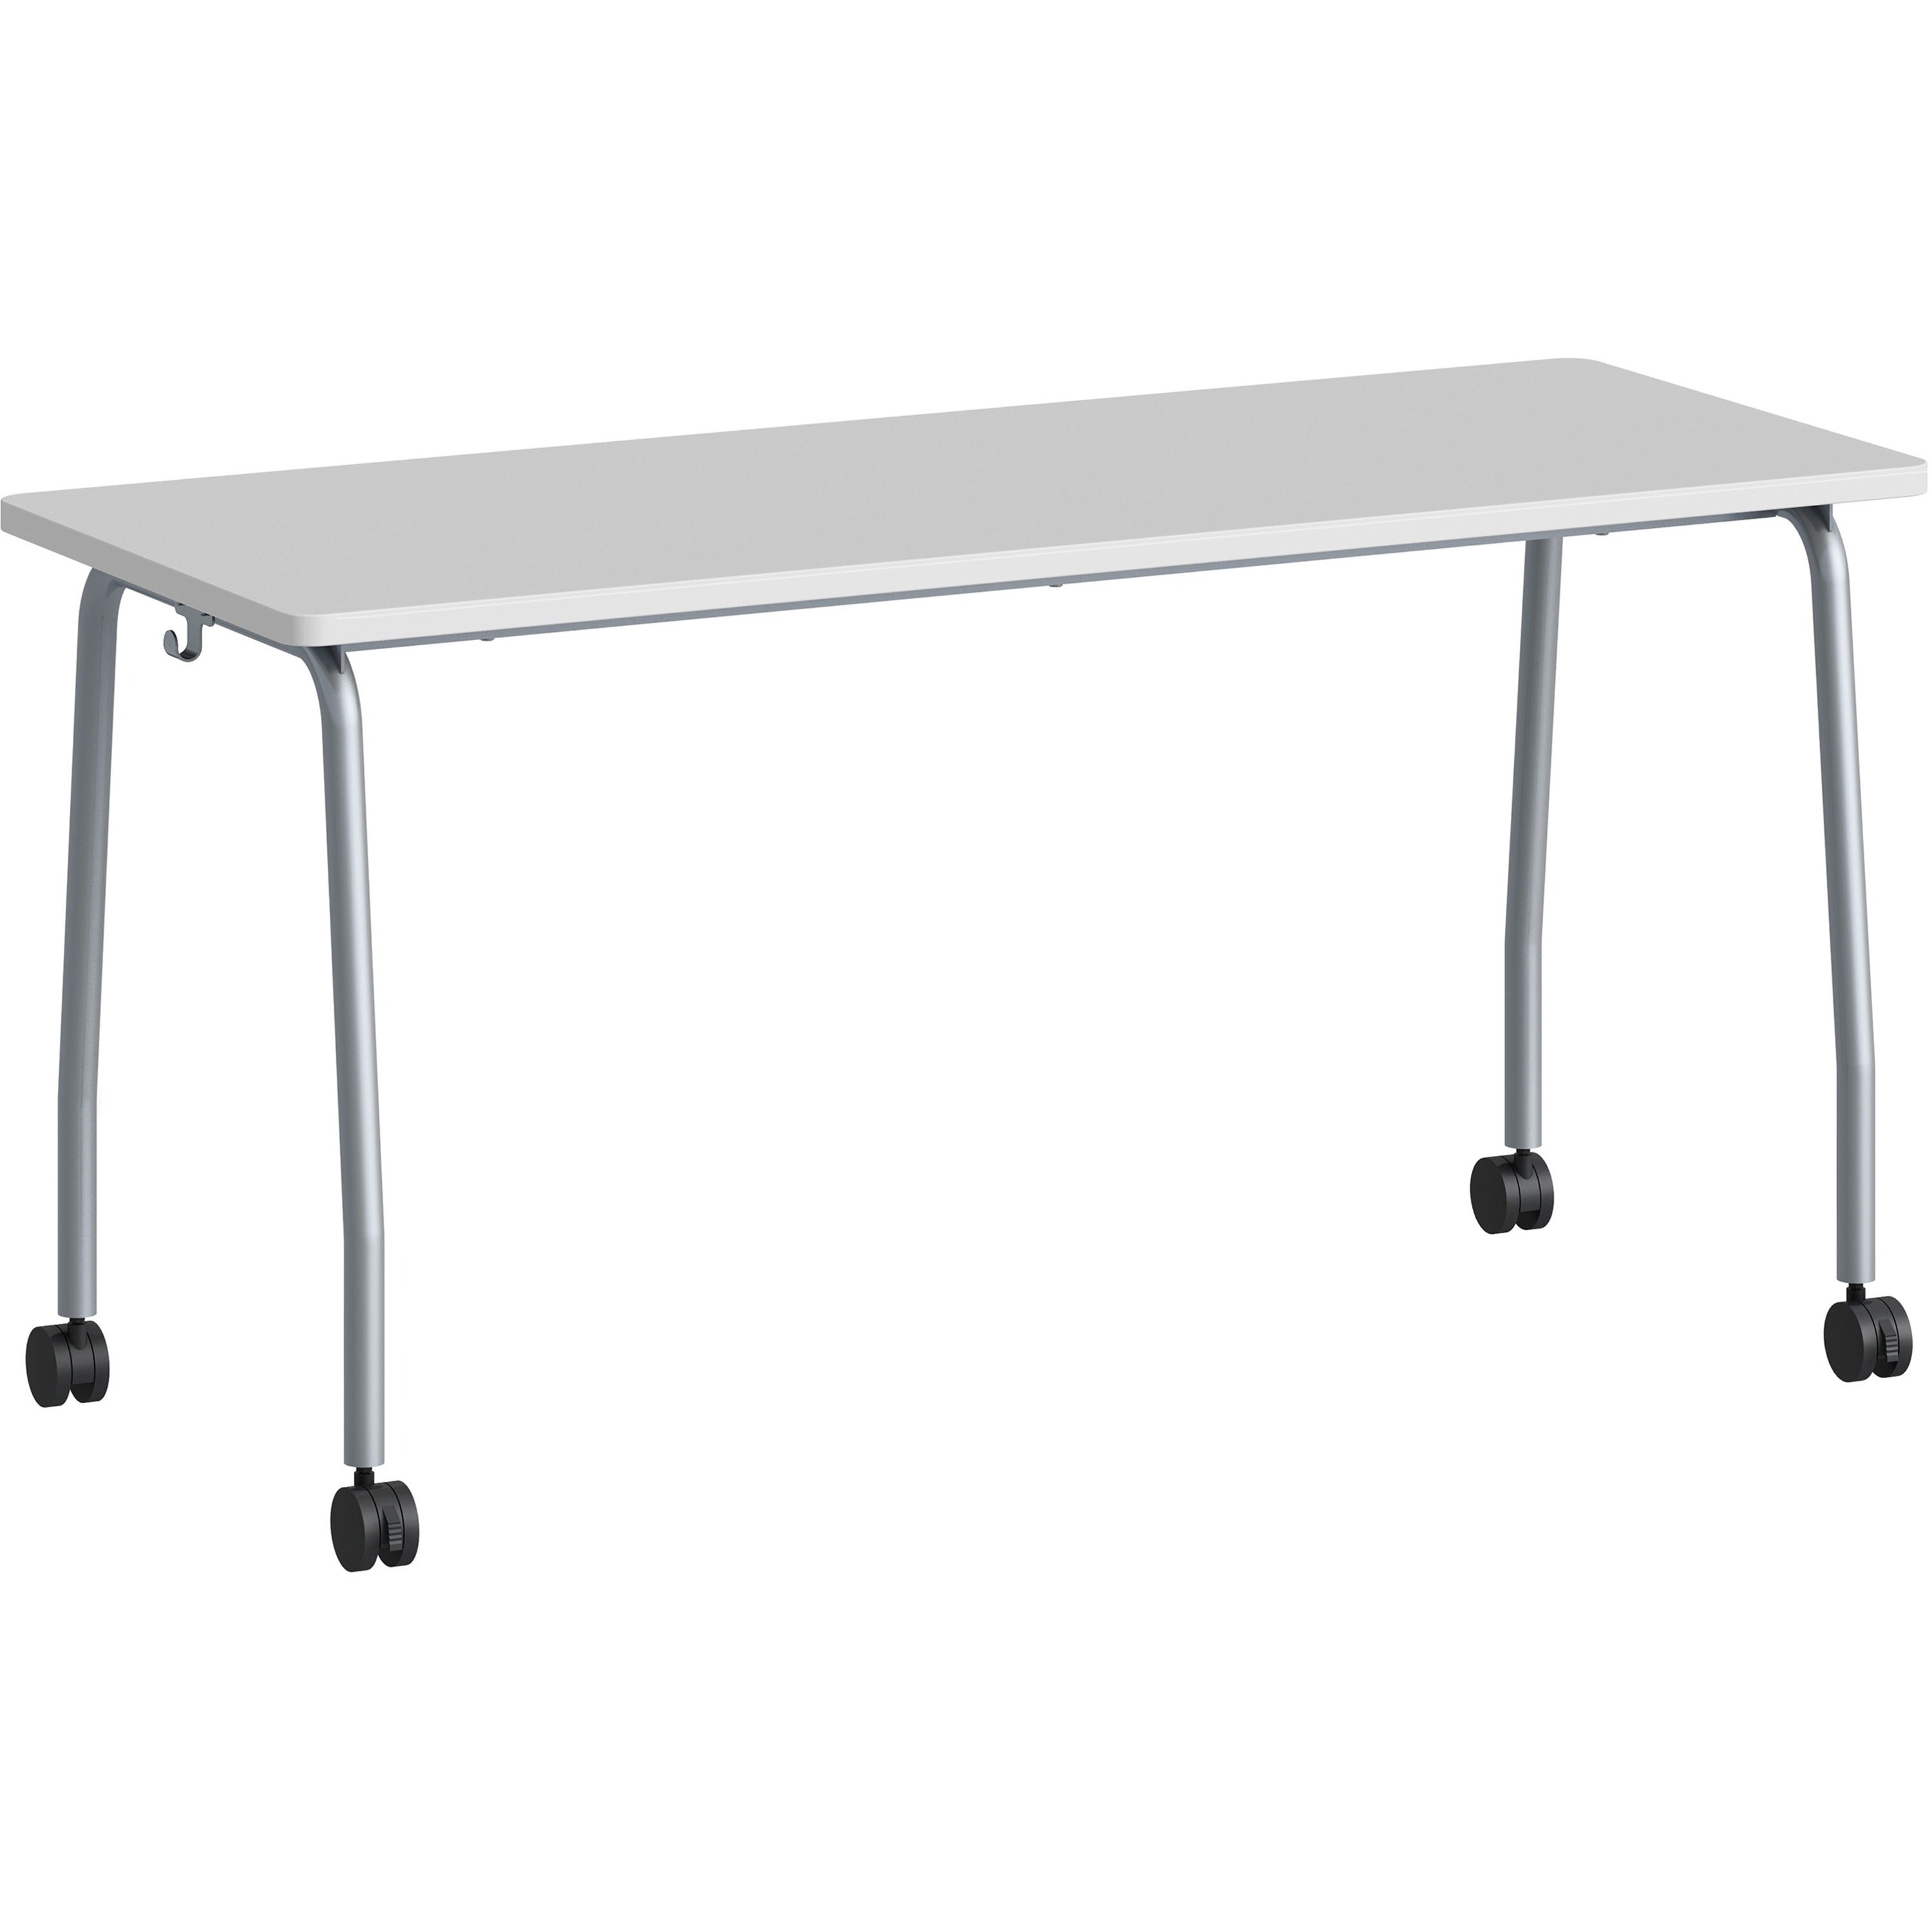 lorell-training-table-for-table-toplaminated-top-300-lb-capacity-2950-table-top-length-x-2363-table-top-width-x-1-table-top-thickness-59-height-assembly-required-gray-particleboard-top-material-1-each_llr60848 - 1